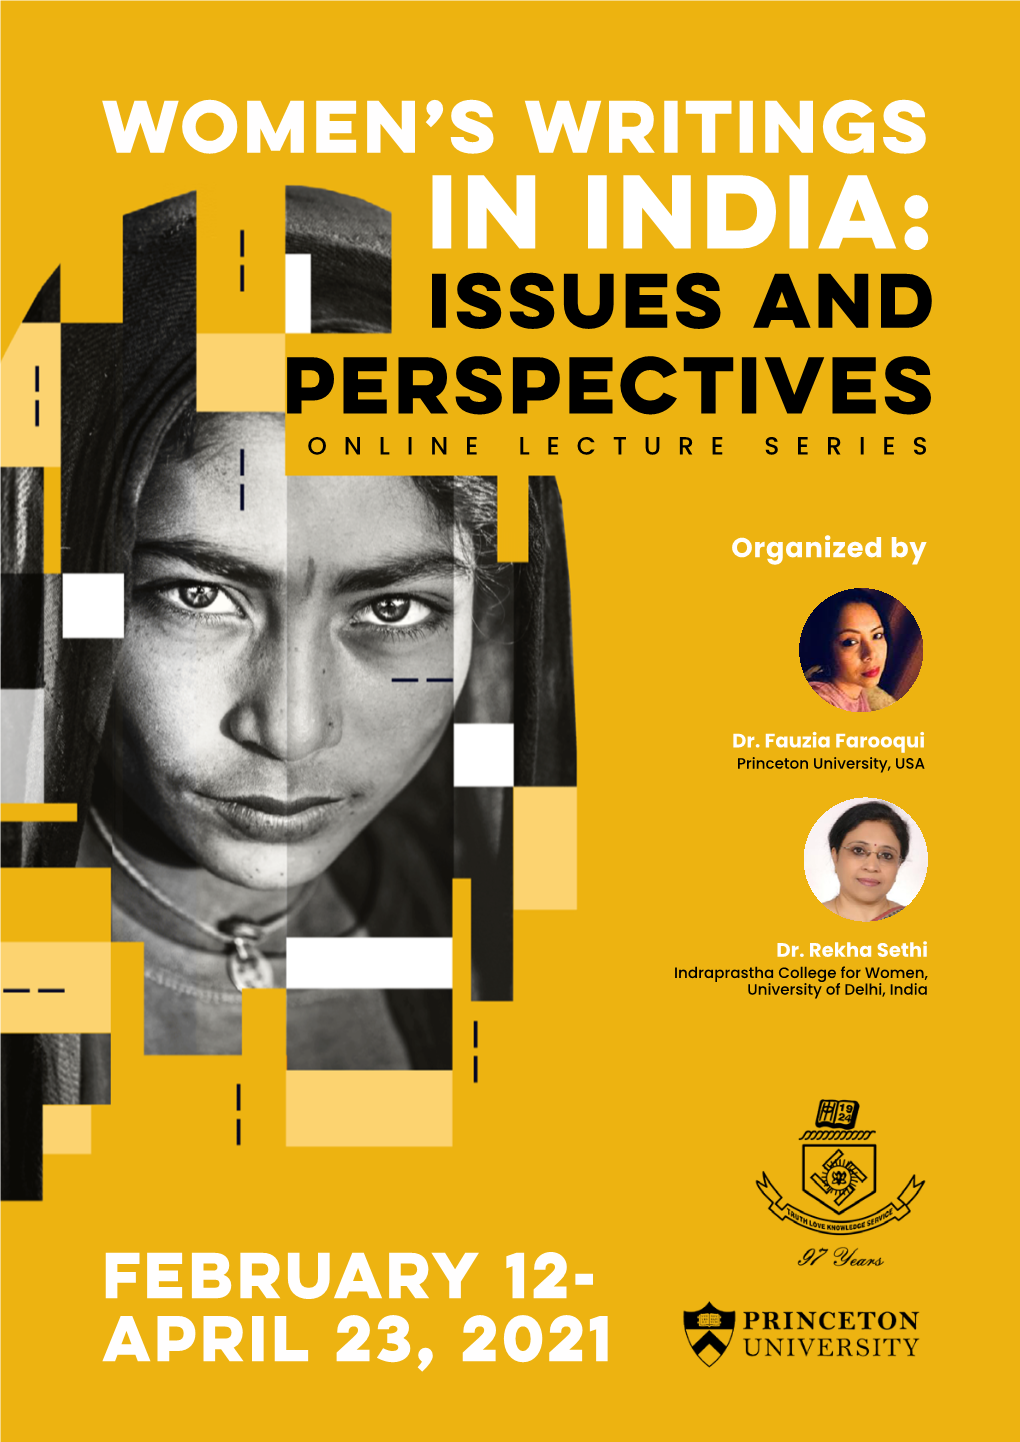 In India: Issues and Perspectives Online Lecture Series